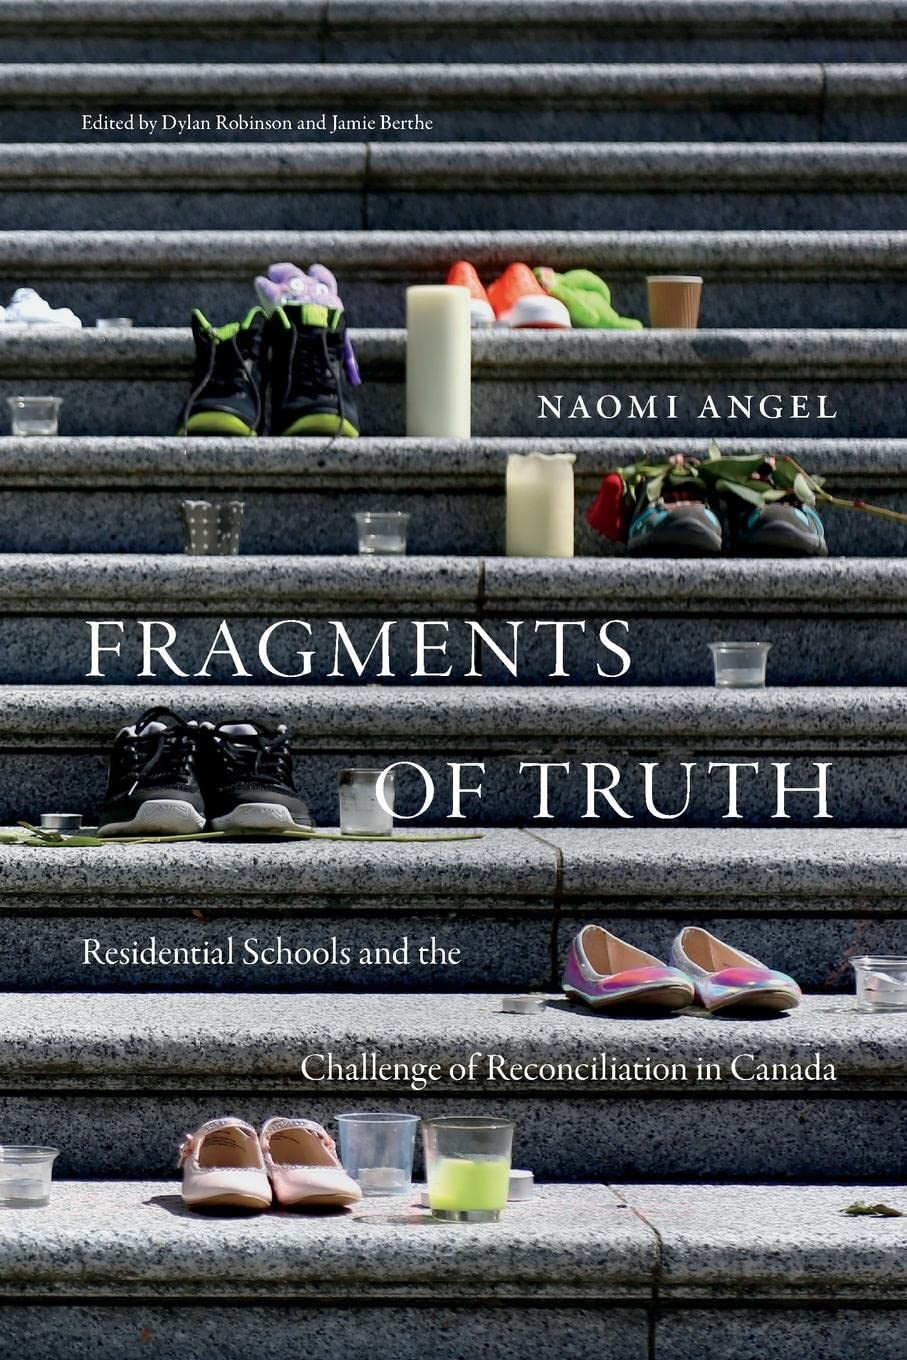 Fragments of Truth: Residential Schools and the Challenge of Reconciliation in Canada by Naomi Angel